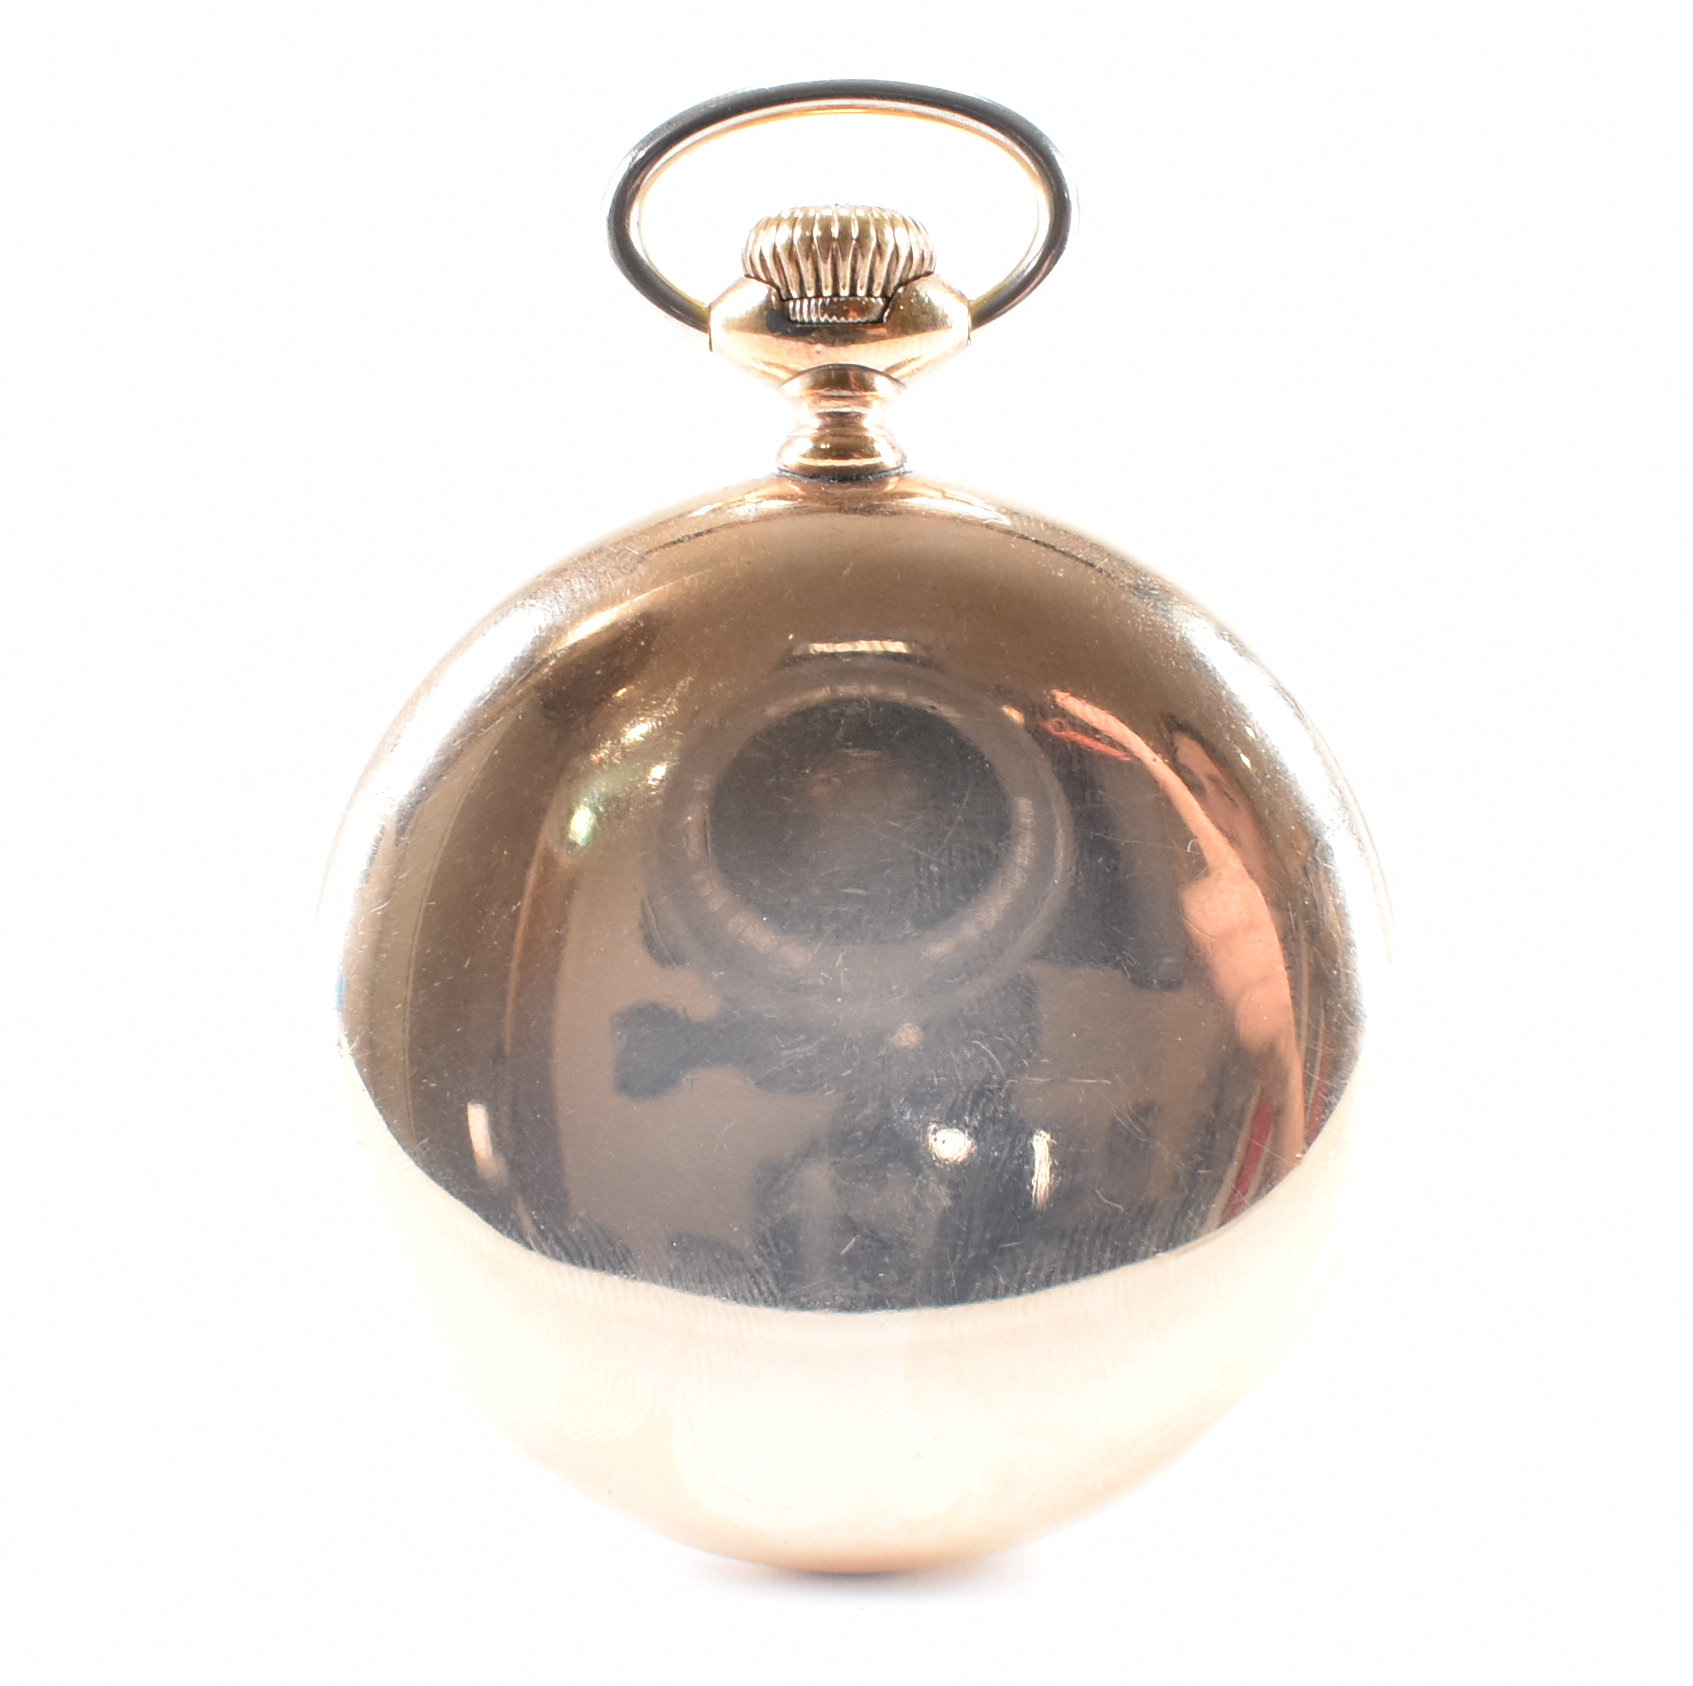 ANTIQUE HAMILTON WATCH COMPANY GOLD PLATED POCKET WATCH - Image 3 of 9